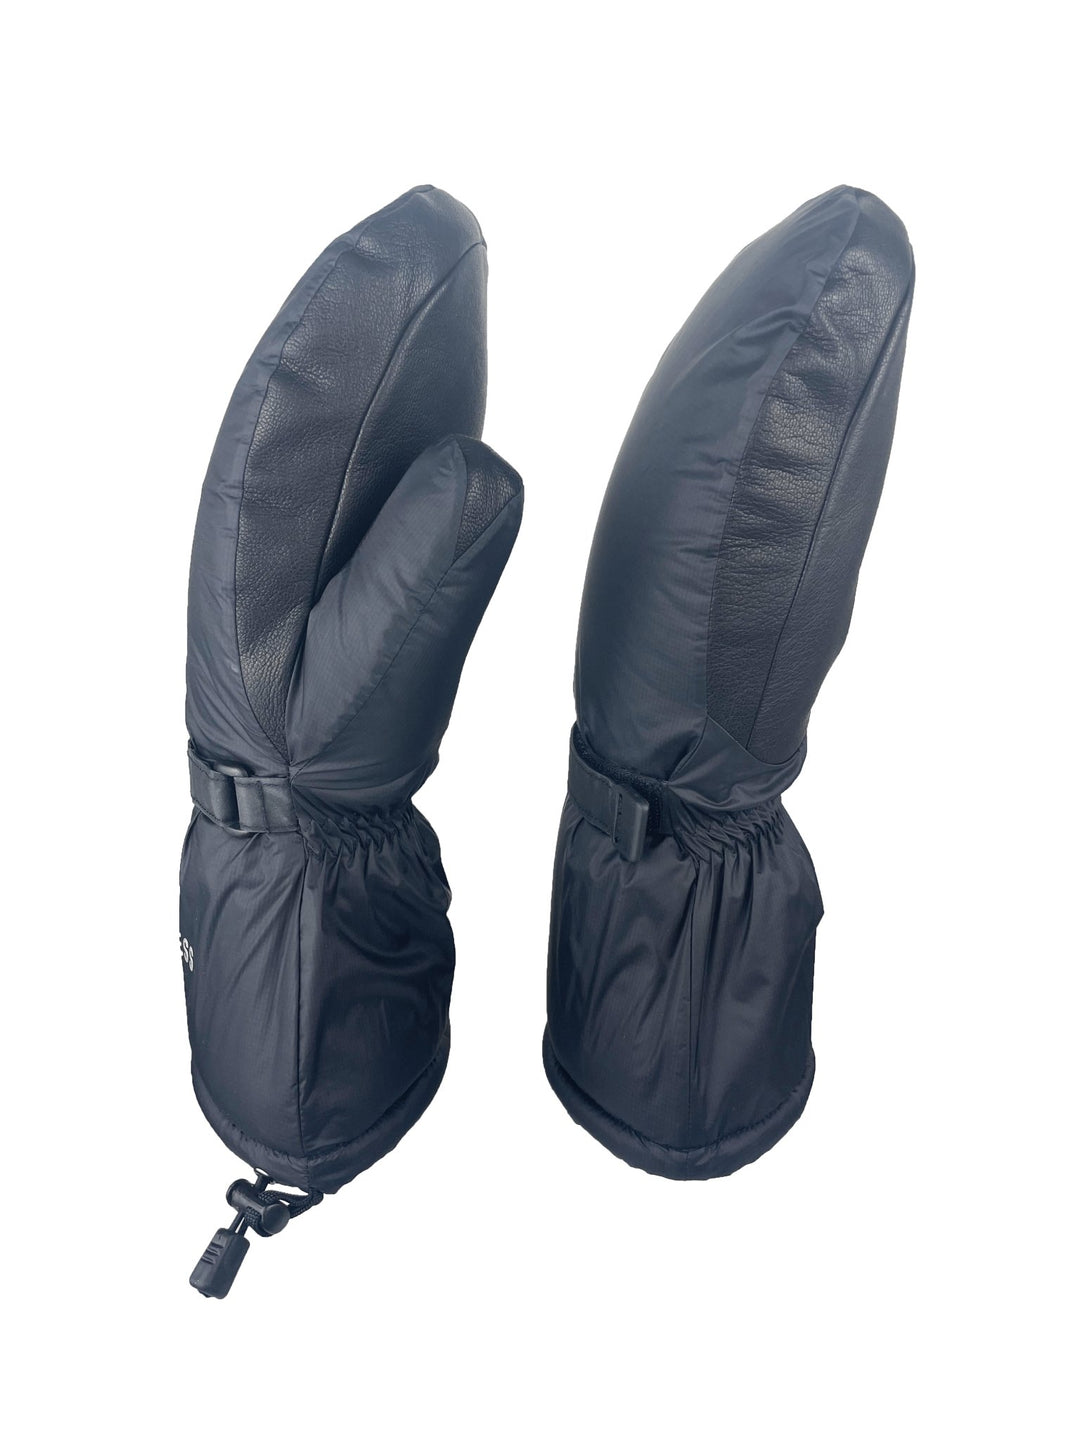 Everest Mitten - Fortress Clothing